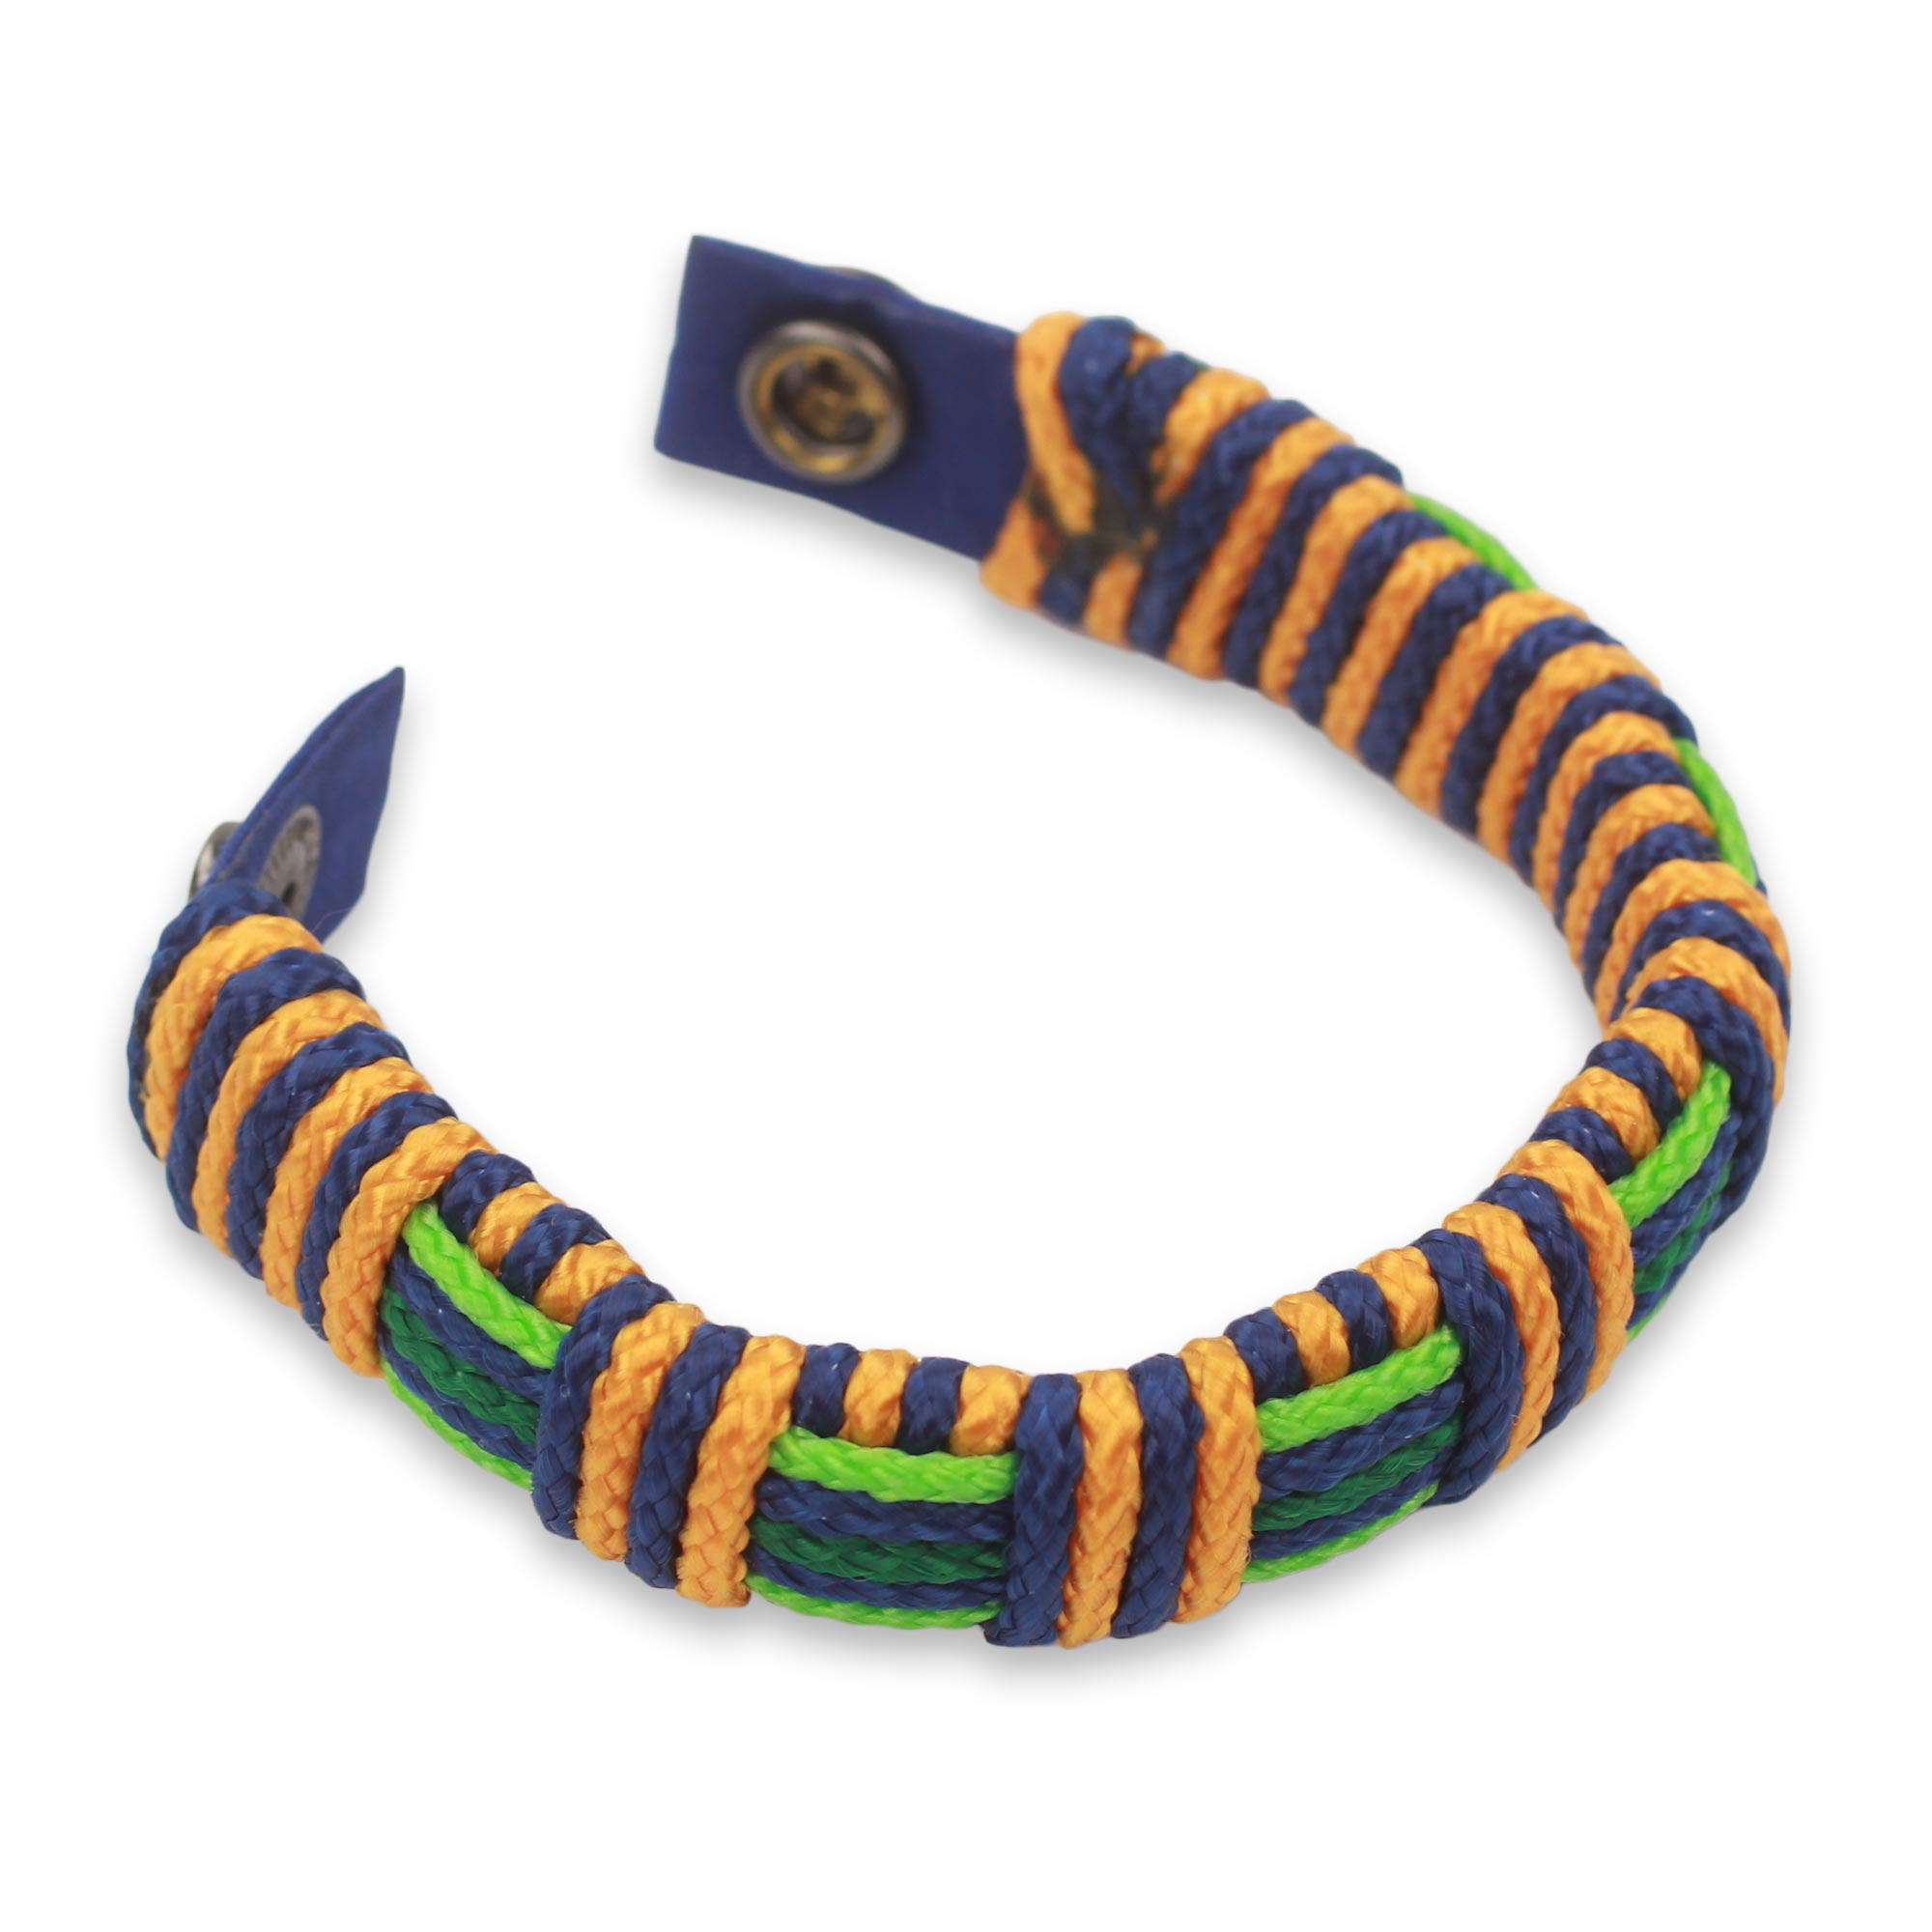 UNICEF Market | African Men's Bracelet Hand Crafted Cord Wristband ...